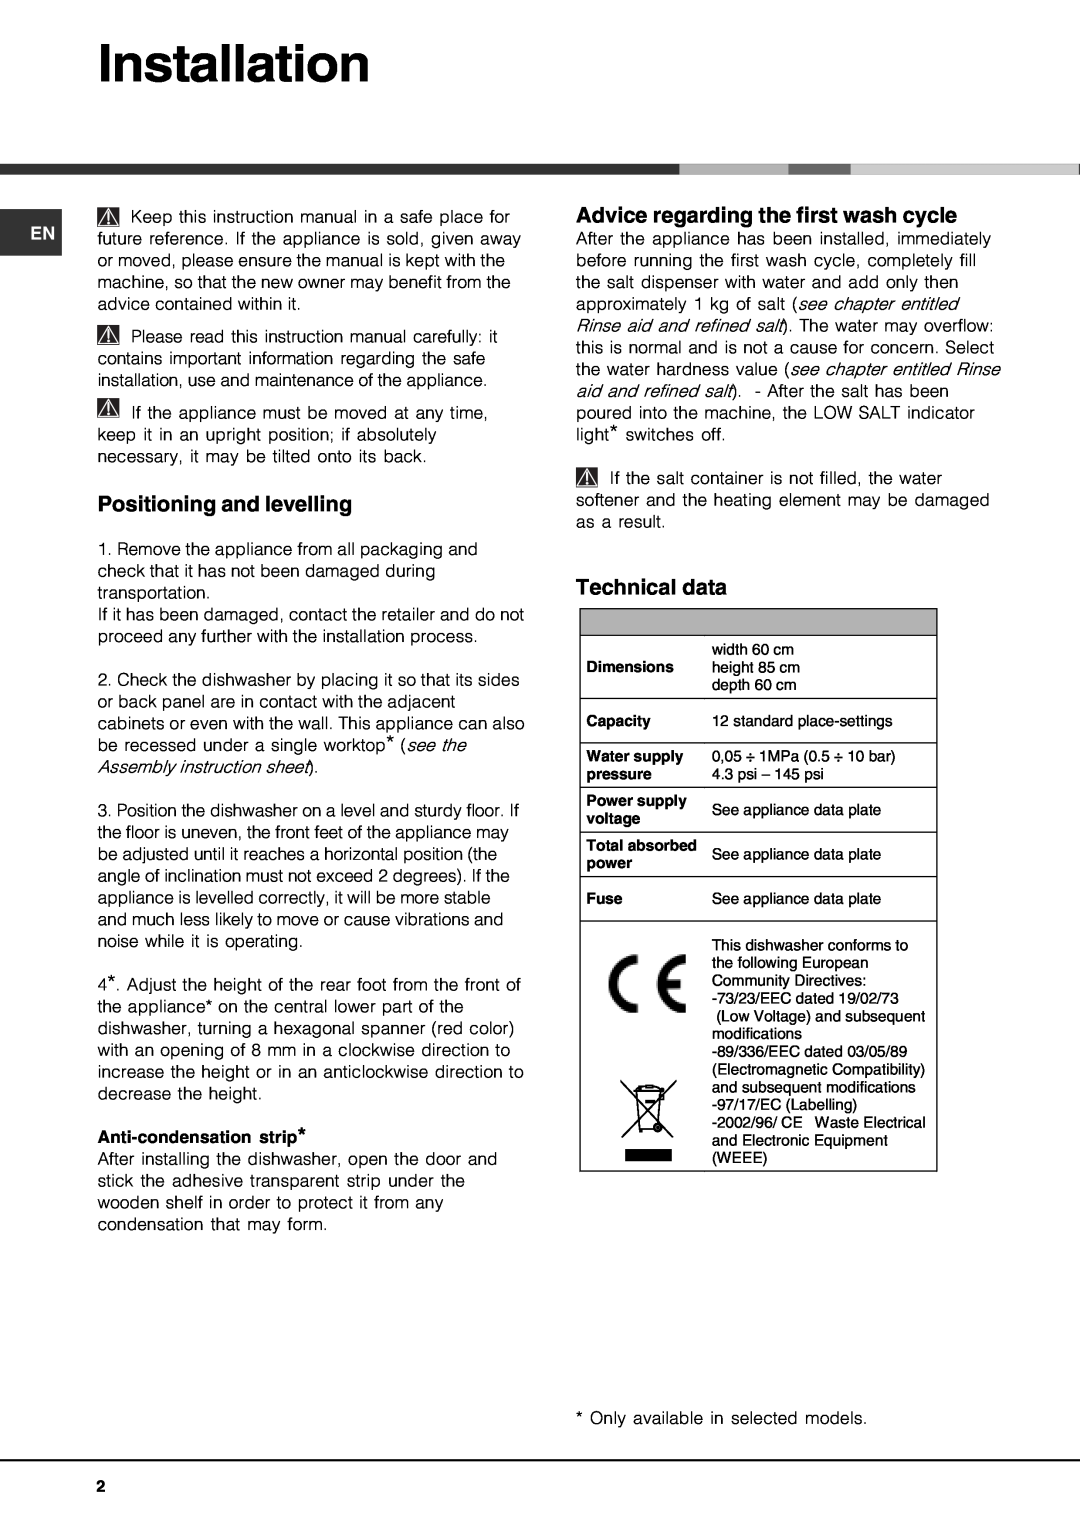 Hotpoint FDD 912 manual Installation, Positioning and levelling, Advice regarding the first wash cycle, Technical data 